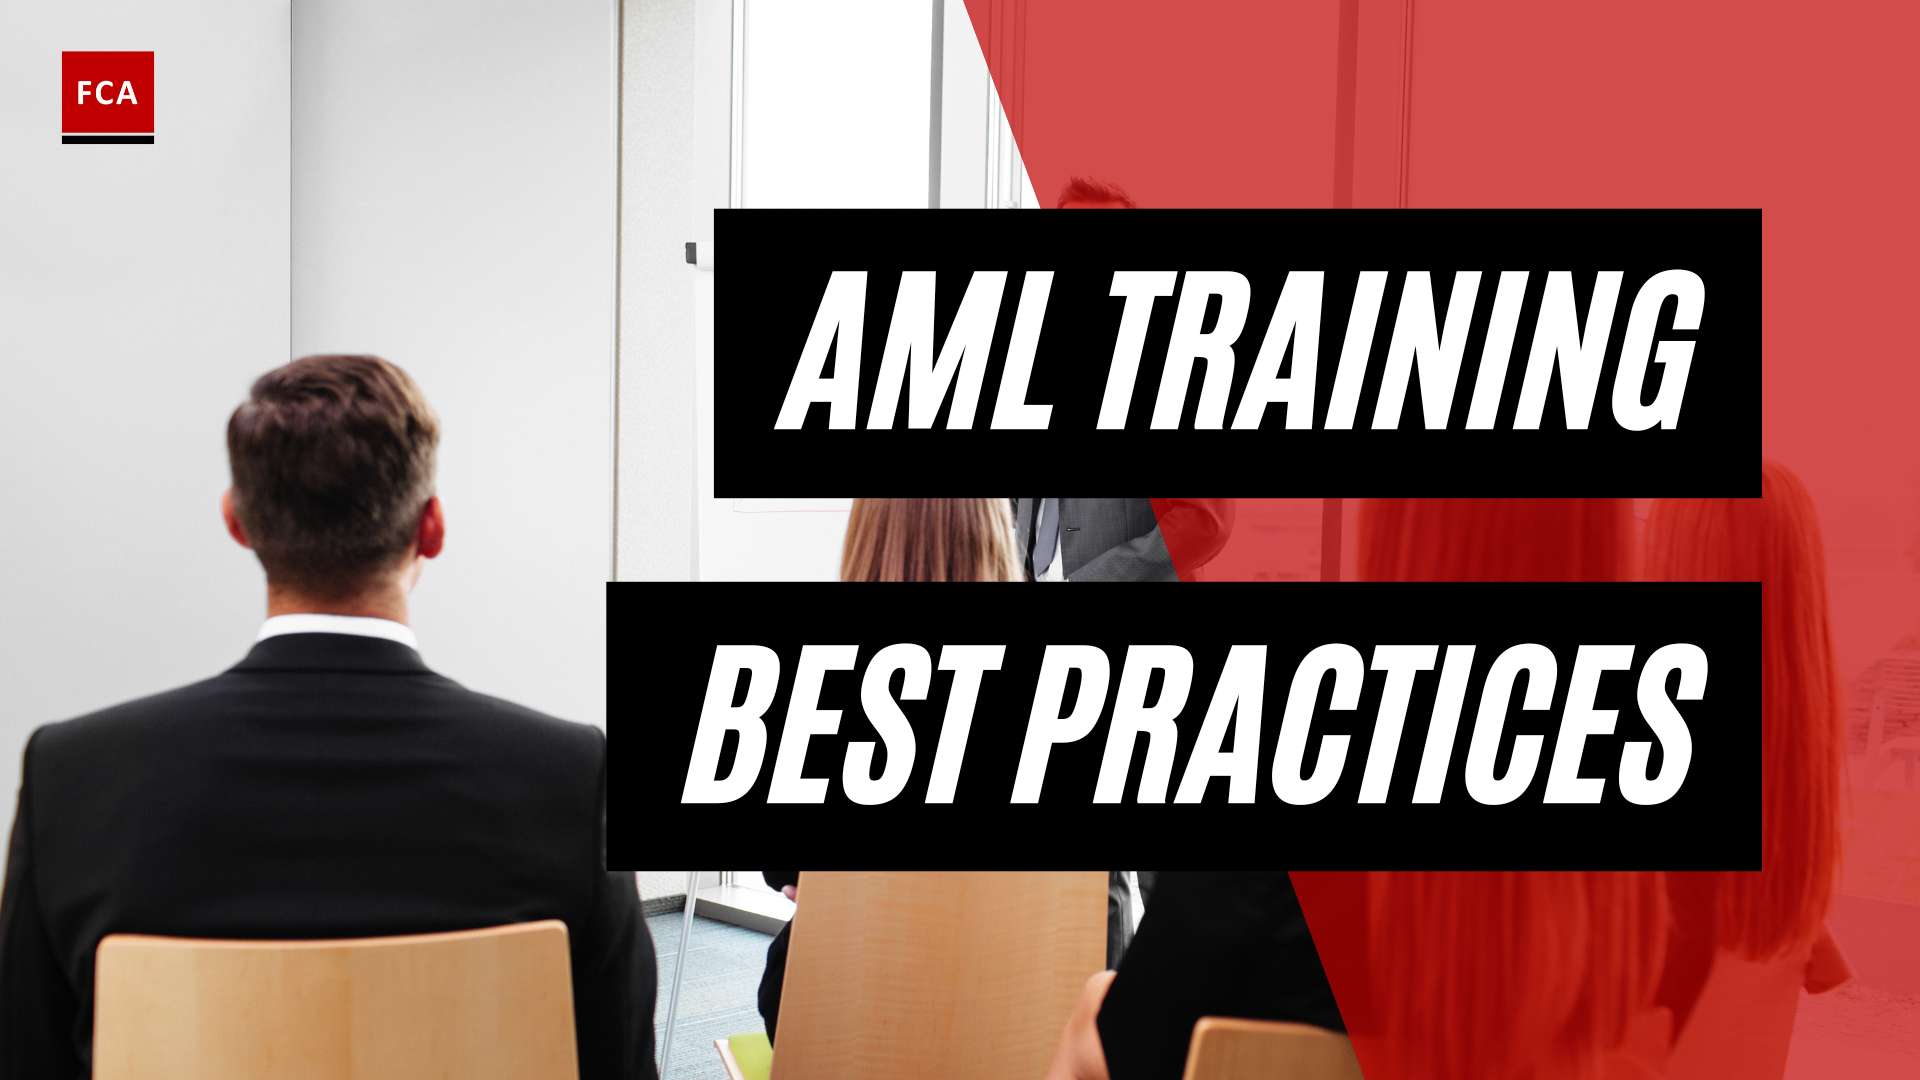 Mastering Compliance: Aml Training Best Practices Unveiled